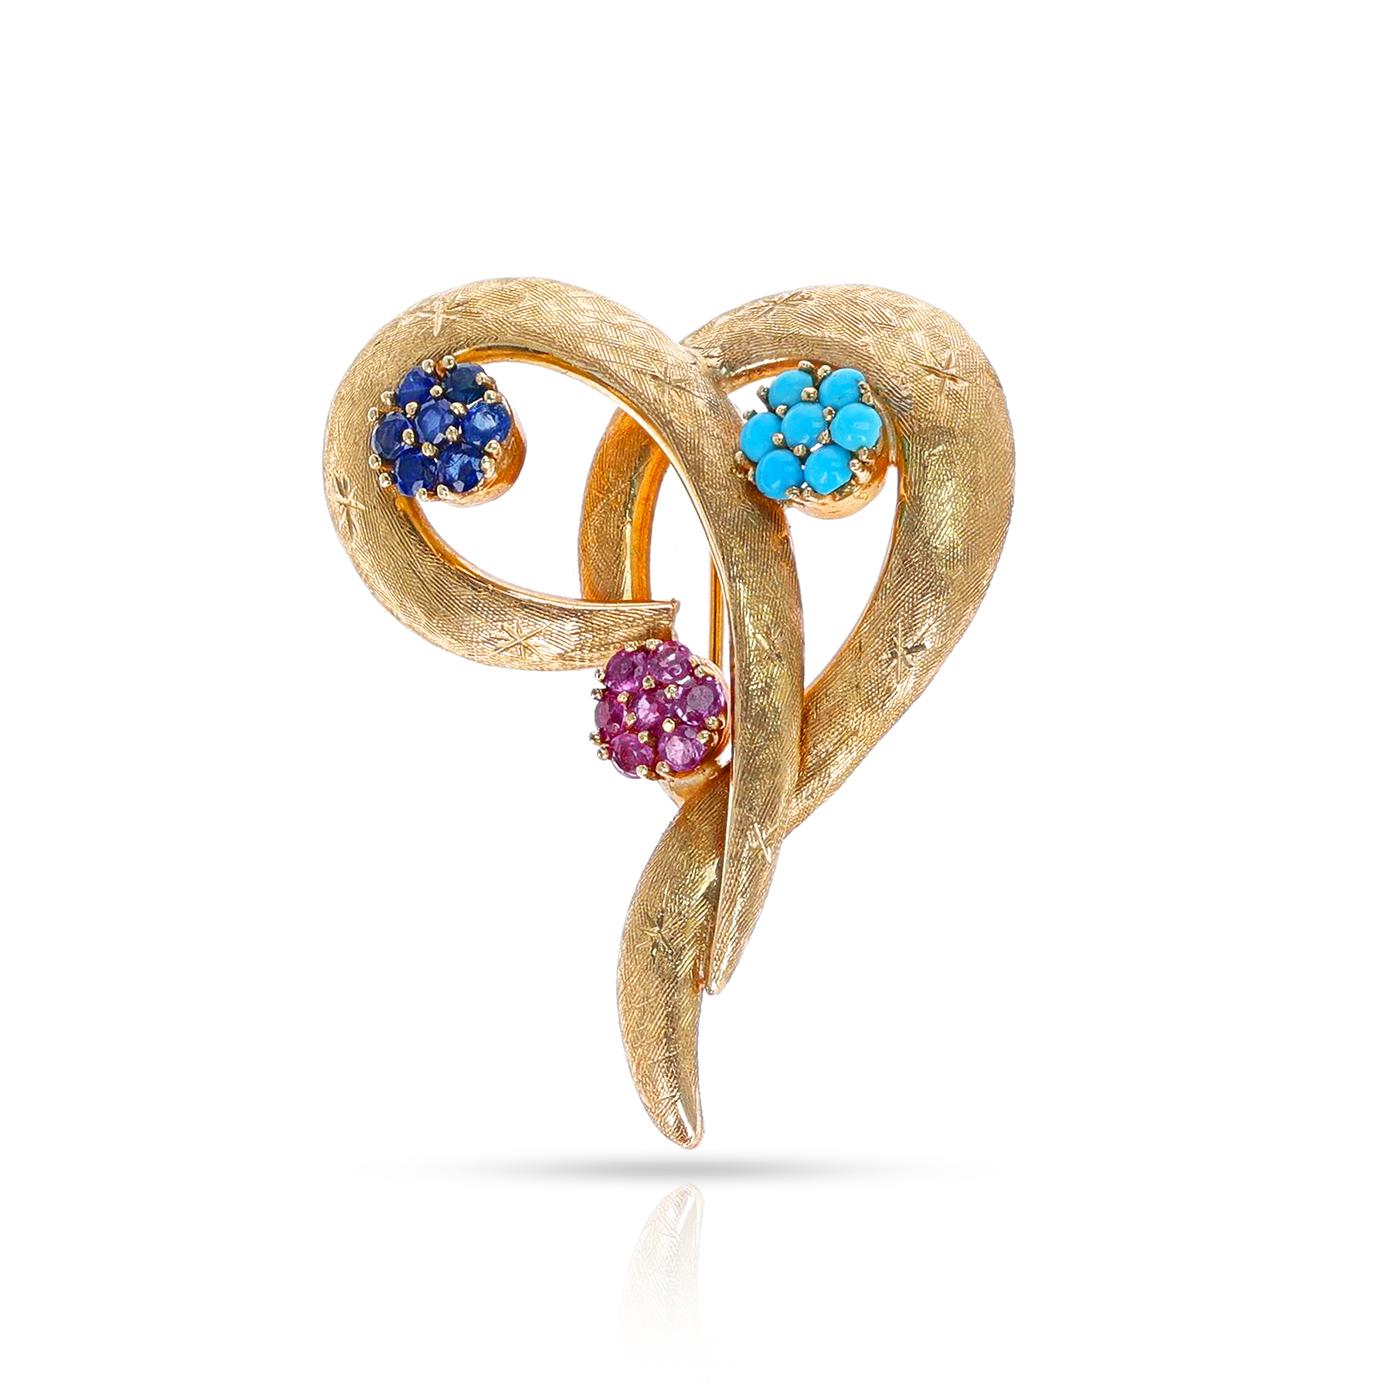 Ruby, Sapphire and Turquoise Heart Brooch, 14k In Excellent Condition For Sale In New York, NY